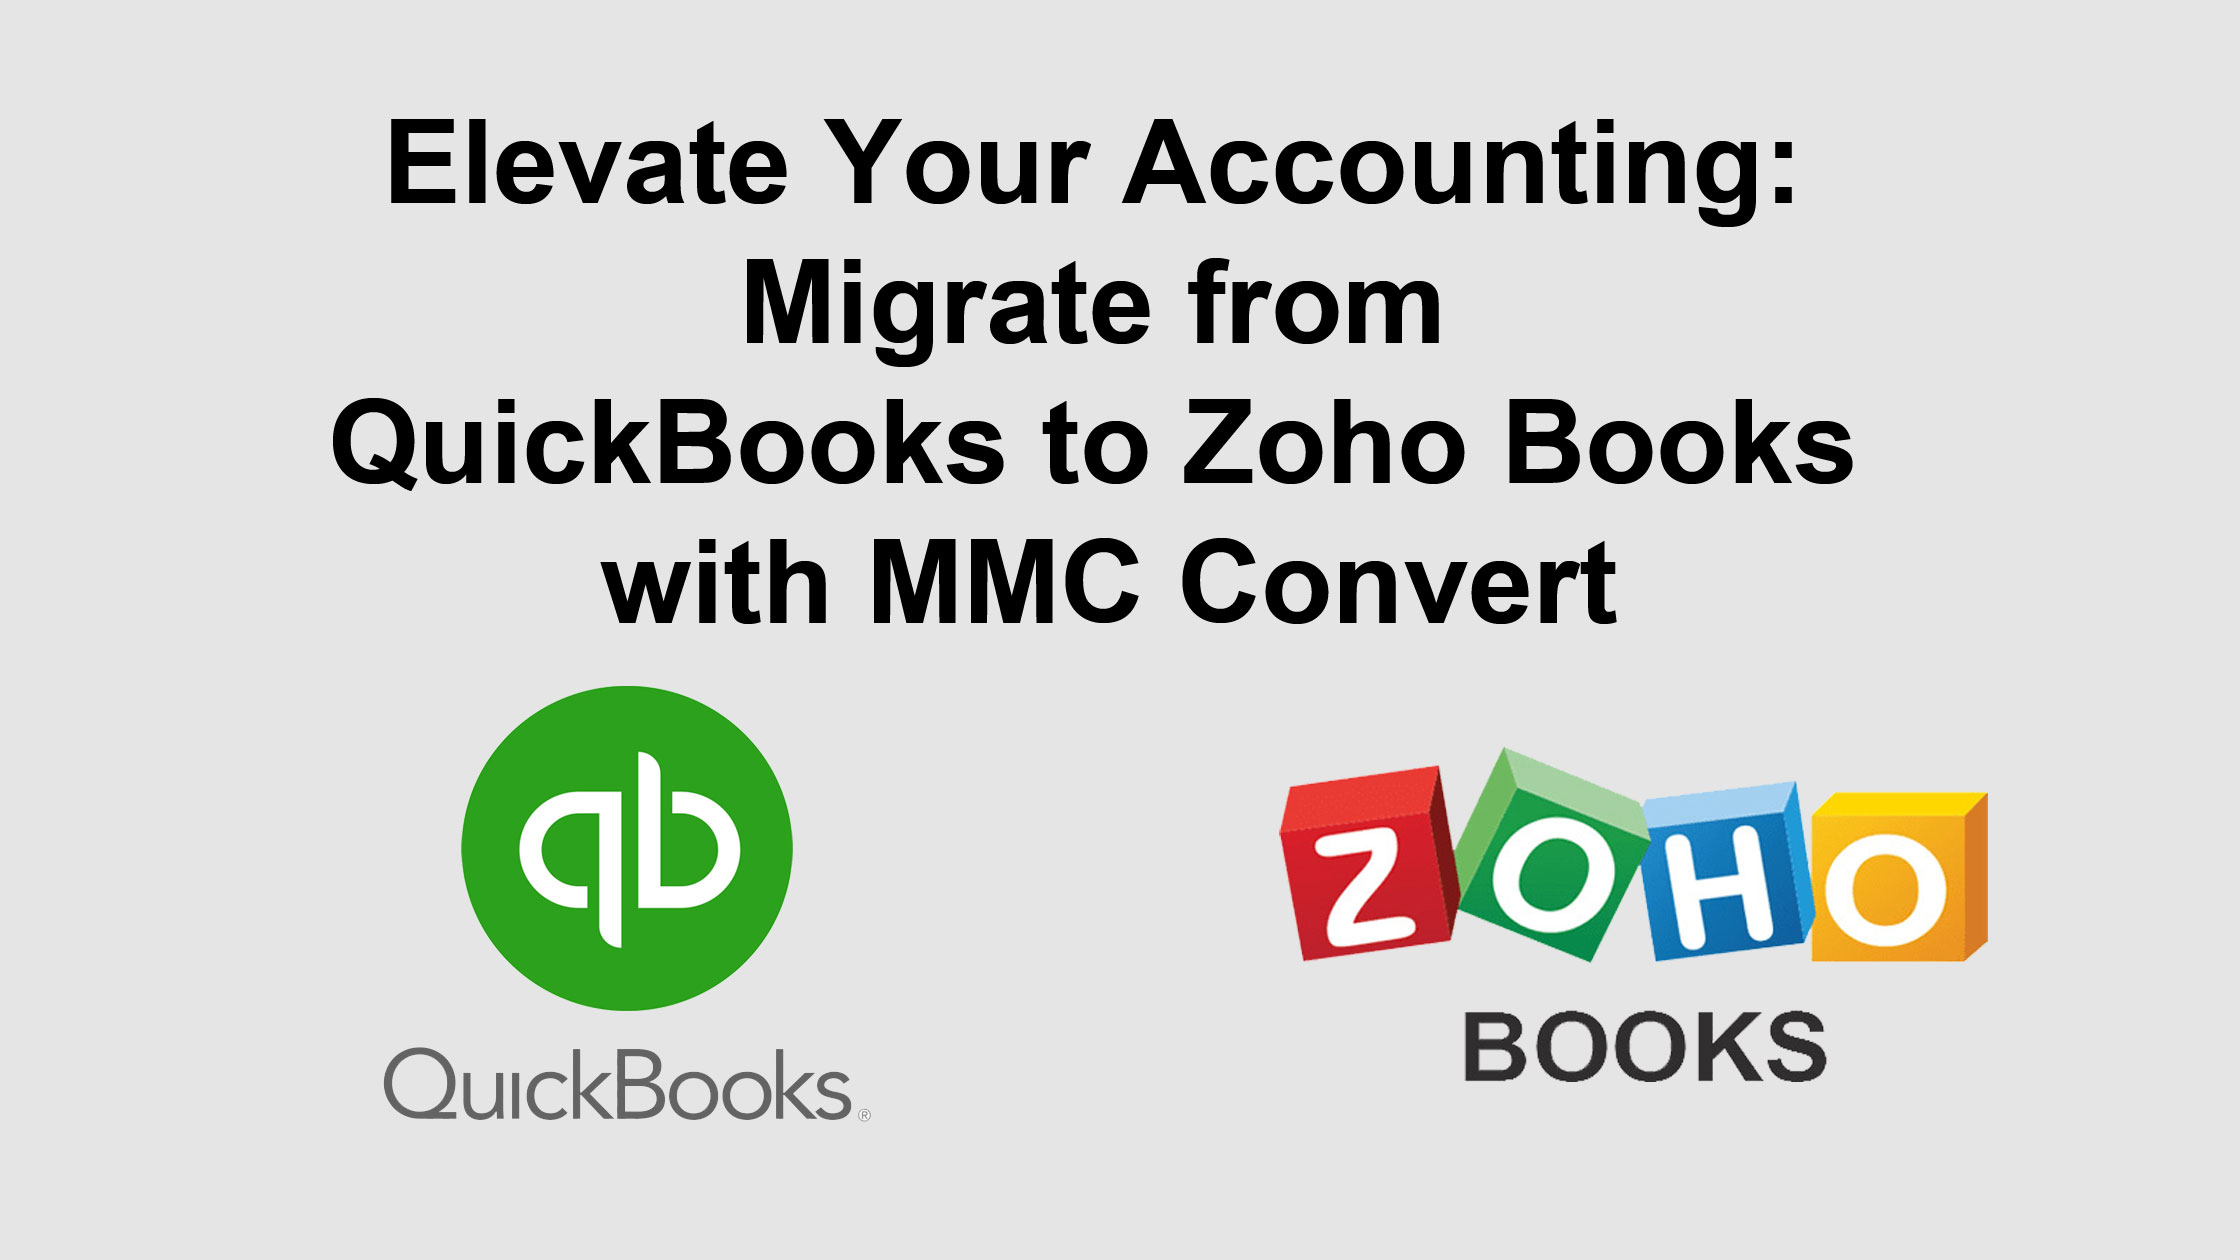 Elevate Your Accounting: Migrate from QuickBooks to Zoho Books with MMC Convert